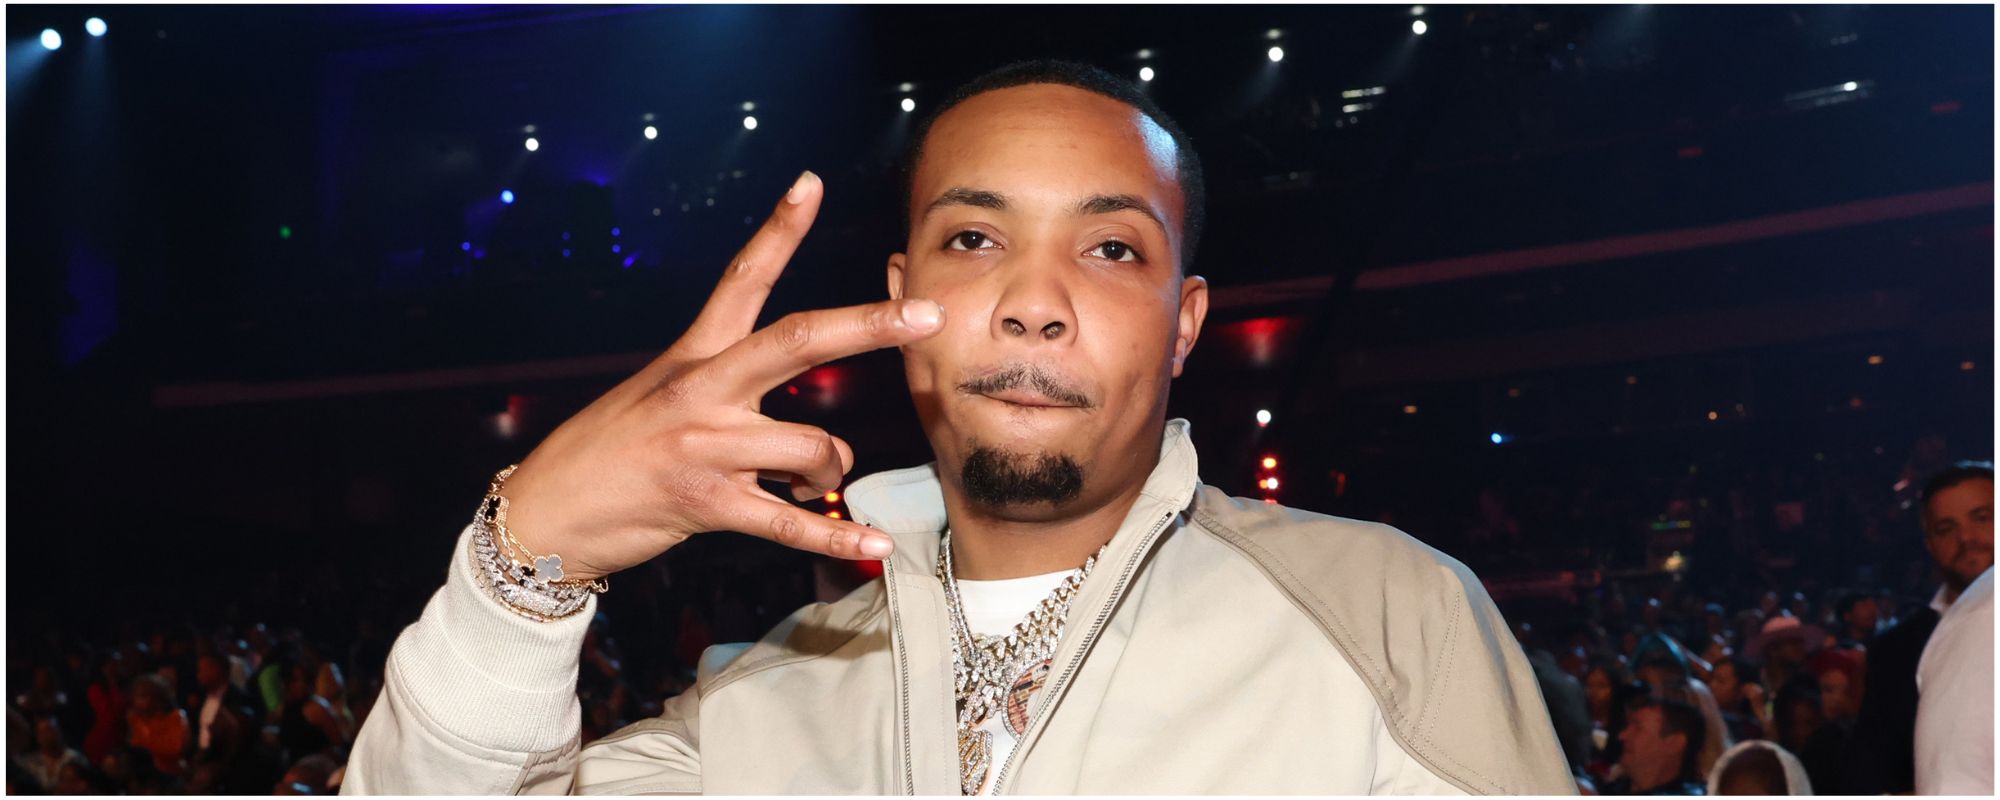 Chicago Rapper G Herbo Faces Prison Time in Wire Fraud Case